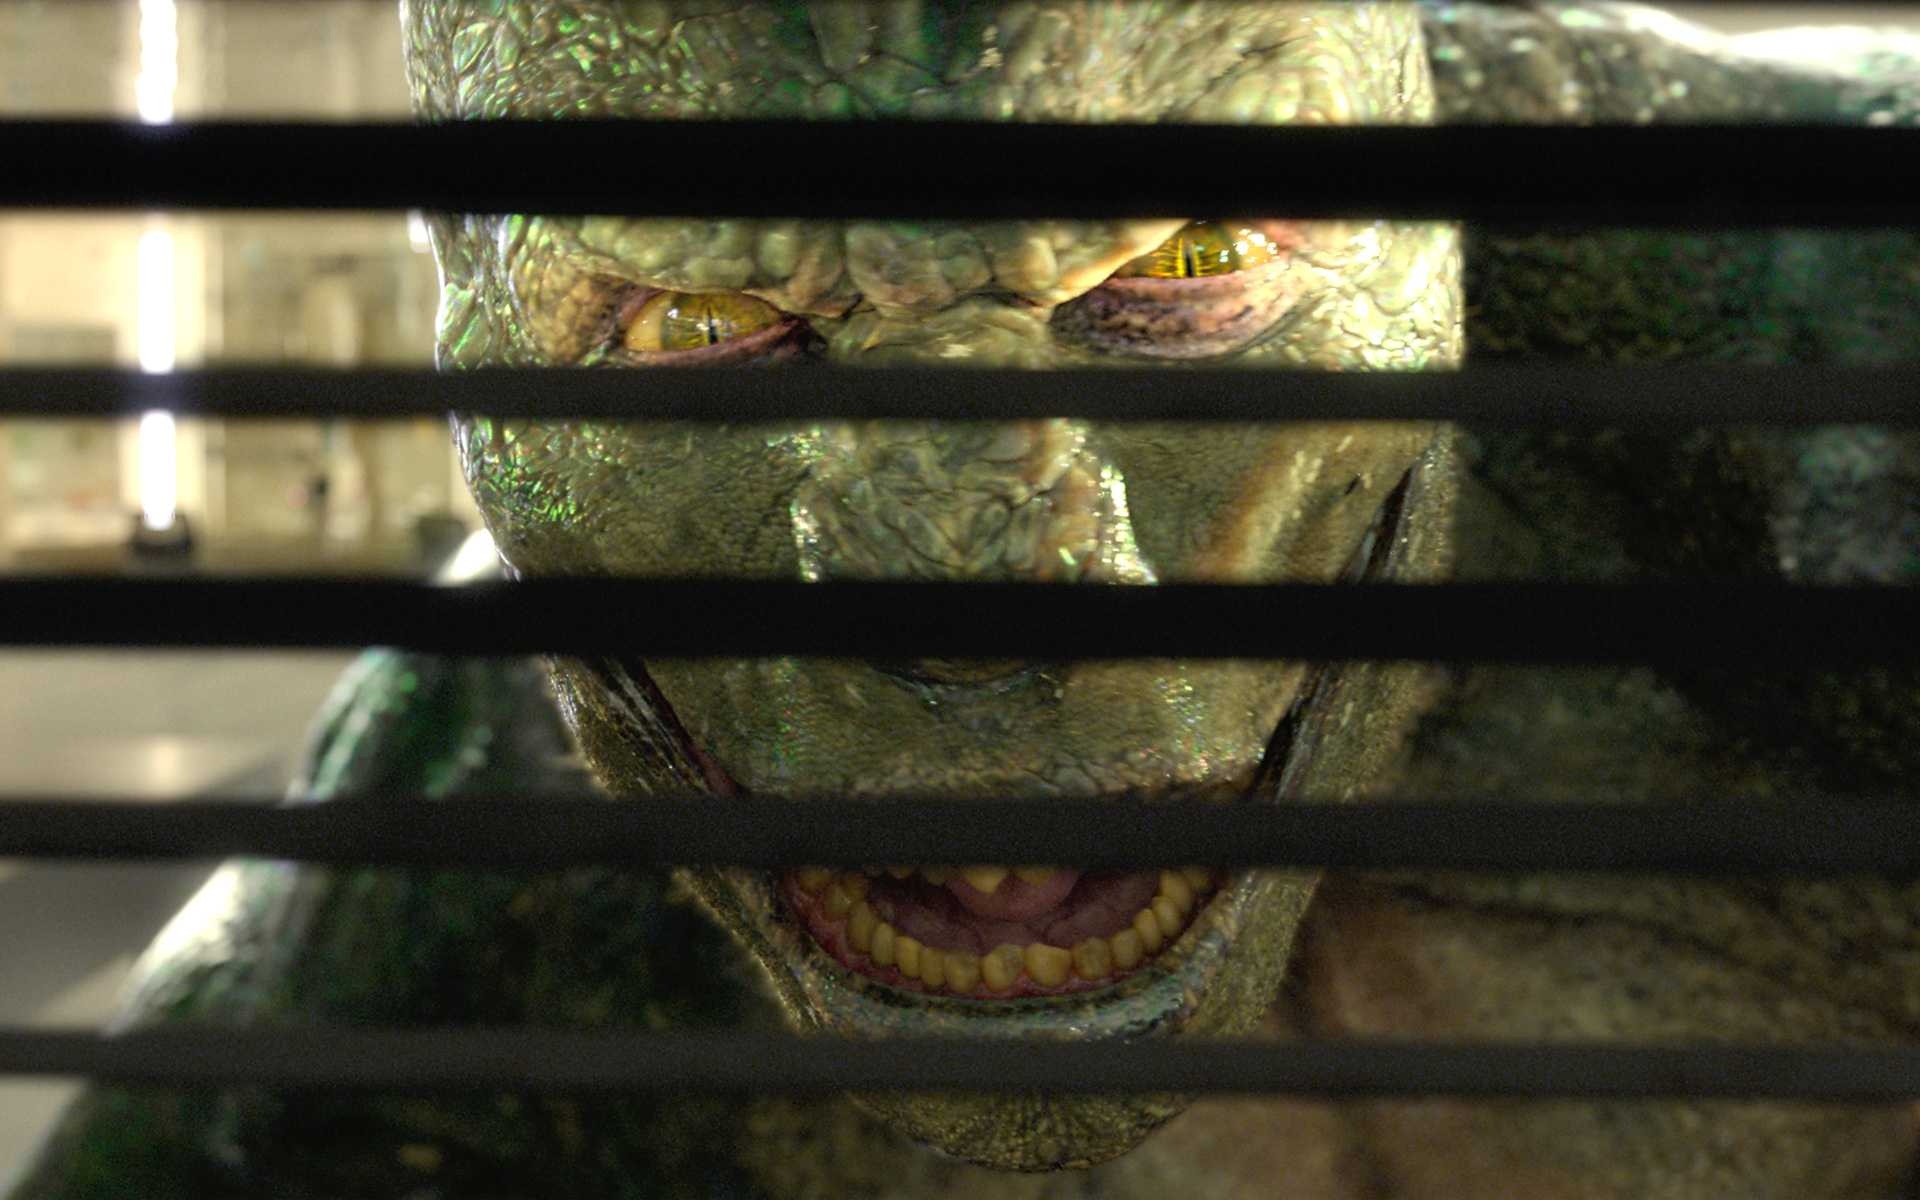 Lizard in Amazing Spider-Man, Thrilling movie moments, Scaly villain, Action-packed scenes, 1920x1200 HD Desktop